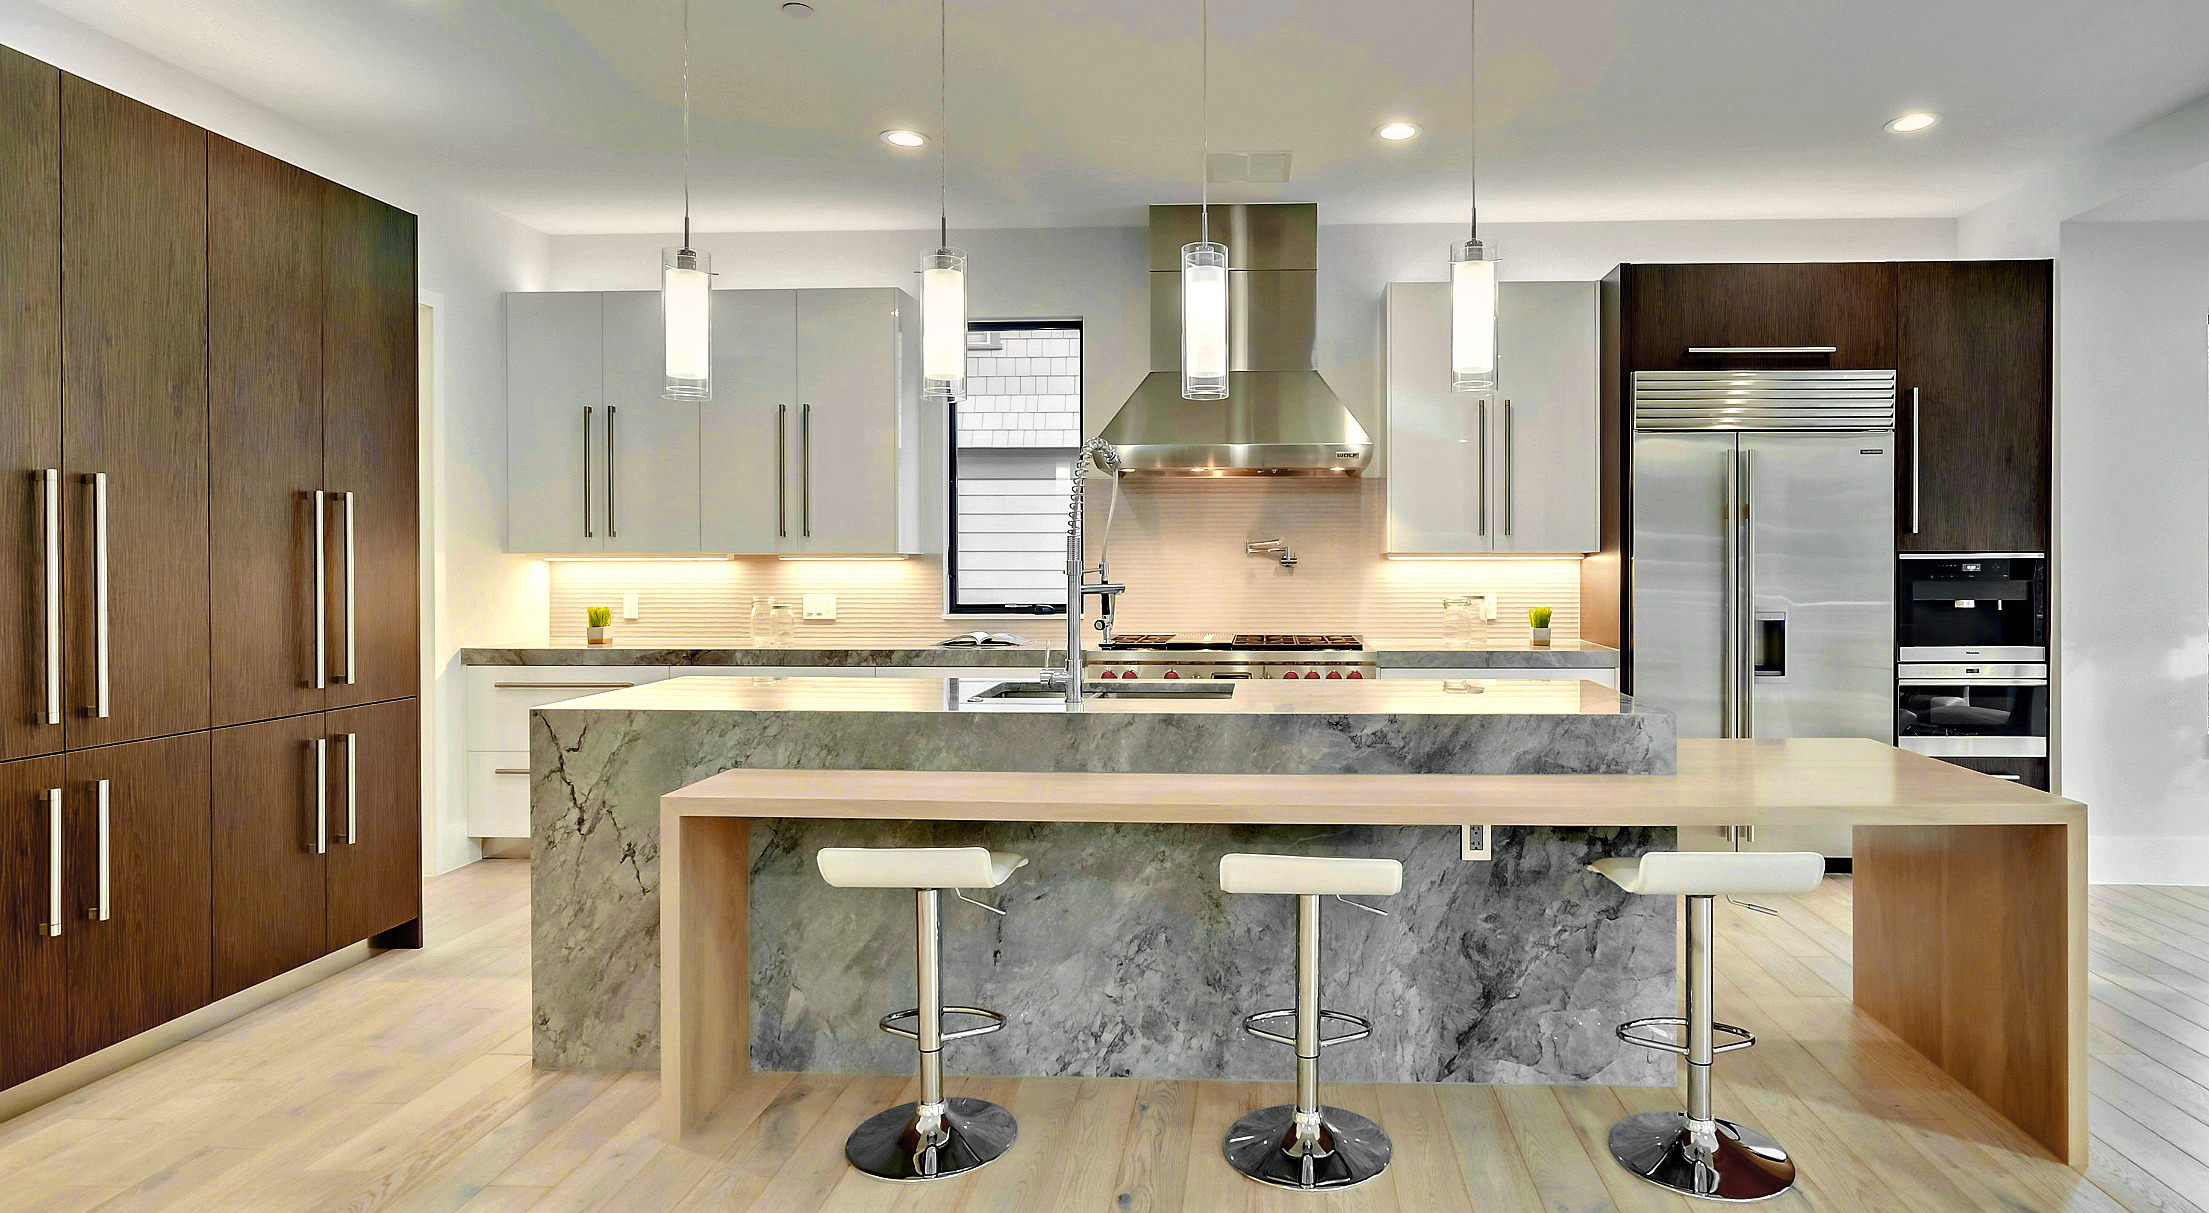 DC Contemporary Kitchen   Kitchen and Bath Remodeling VA   MD   DC